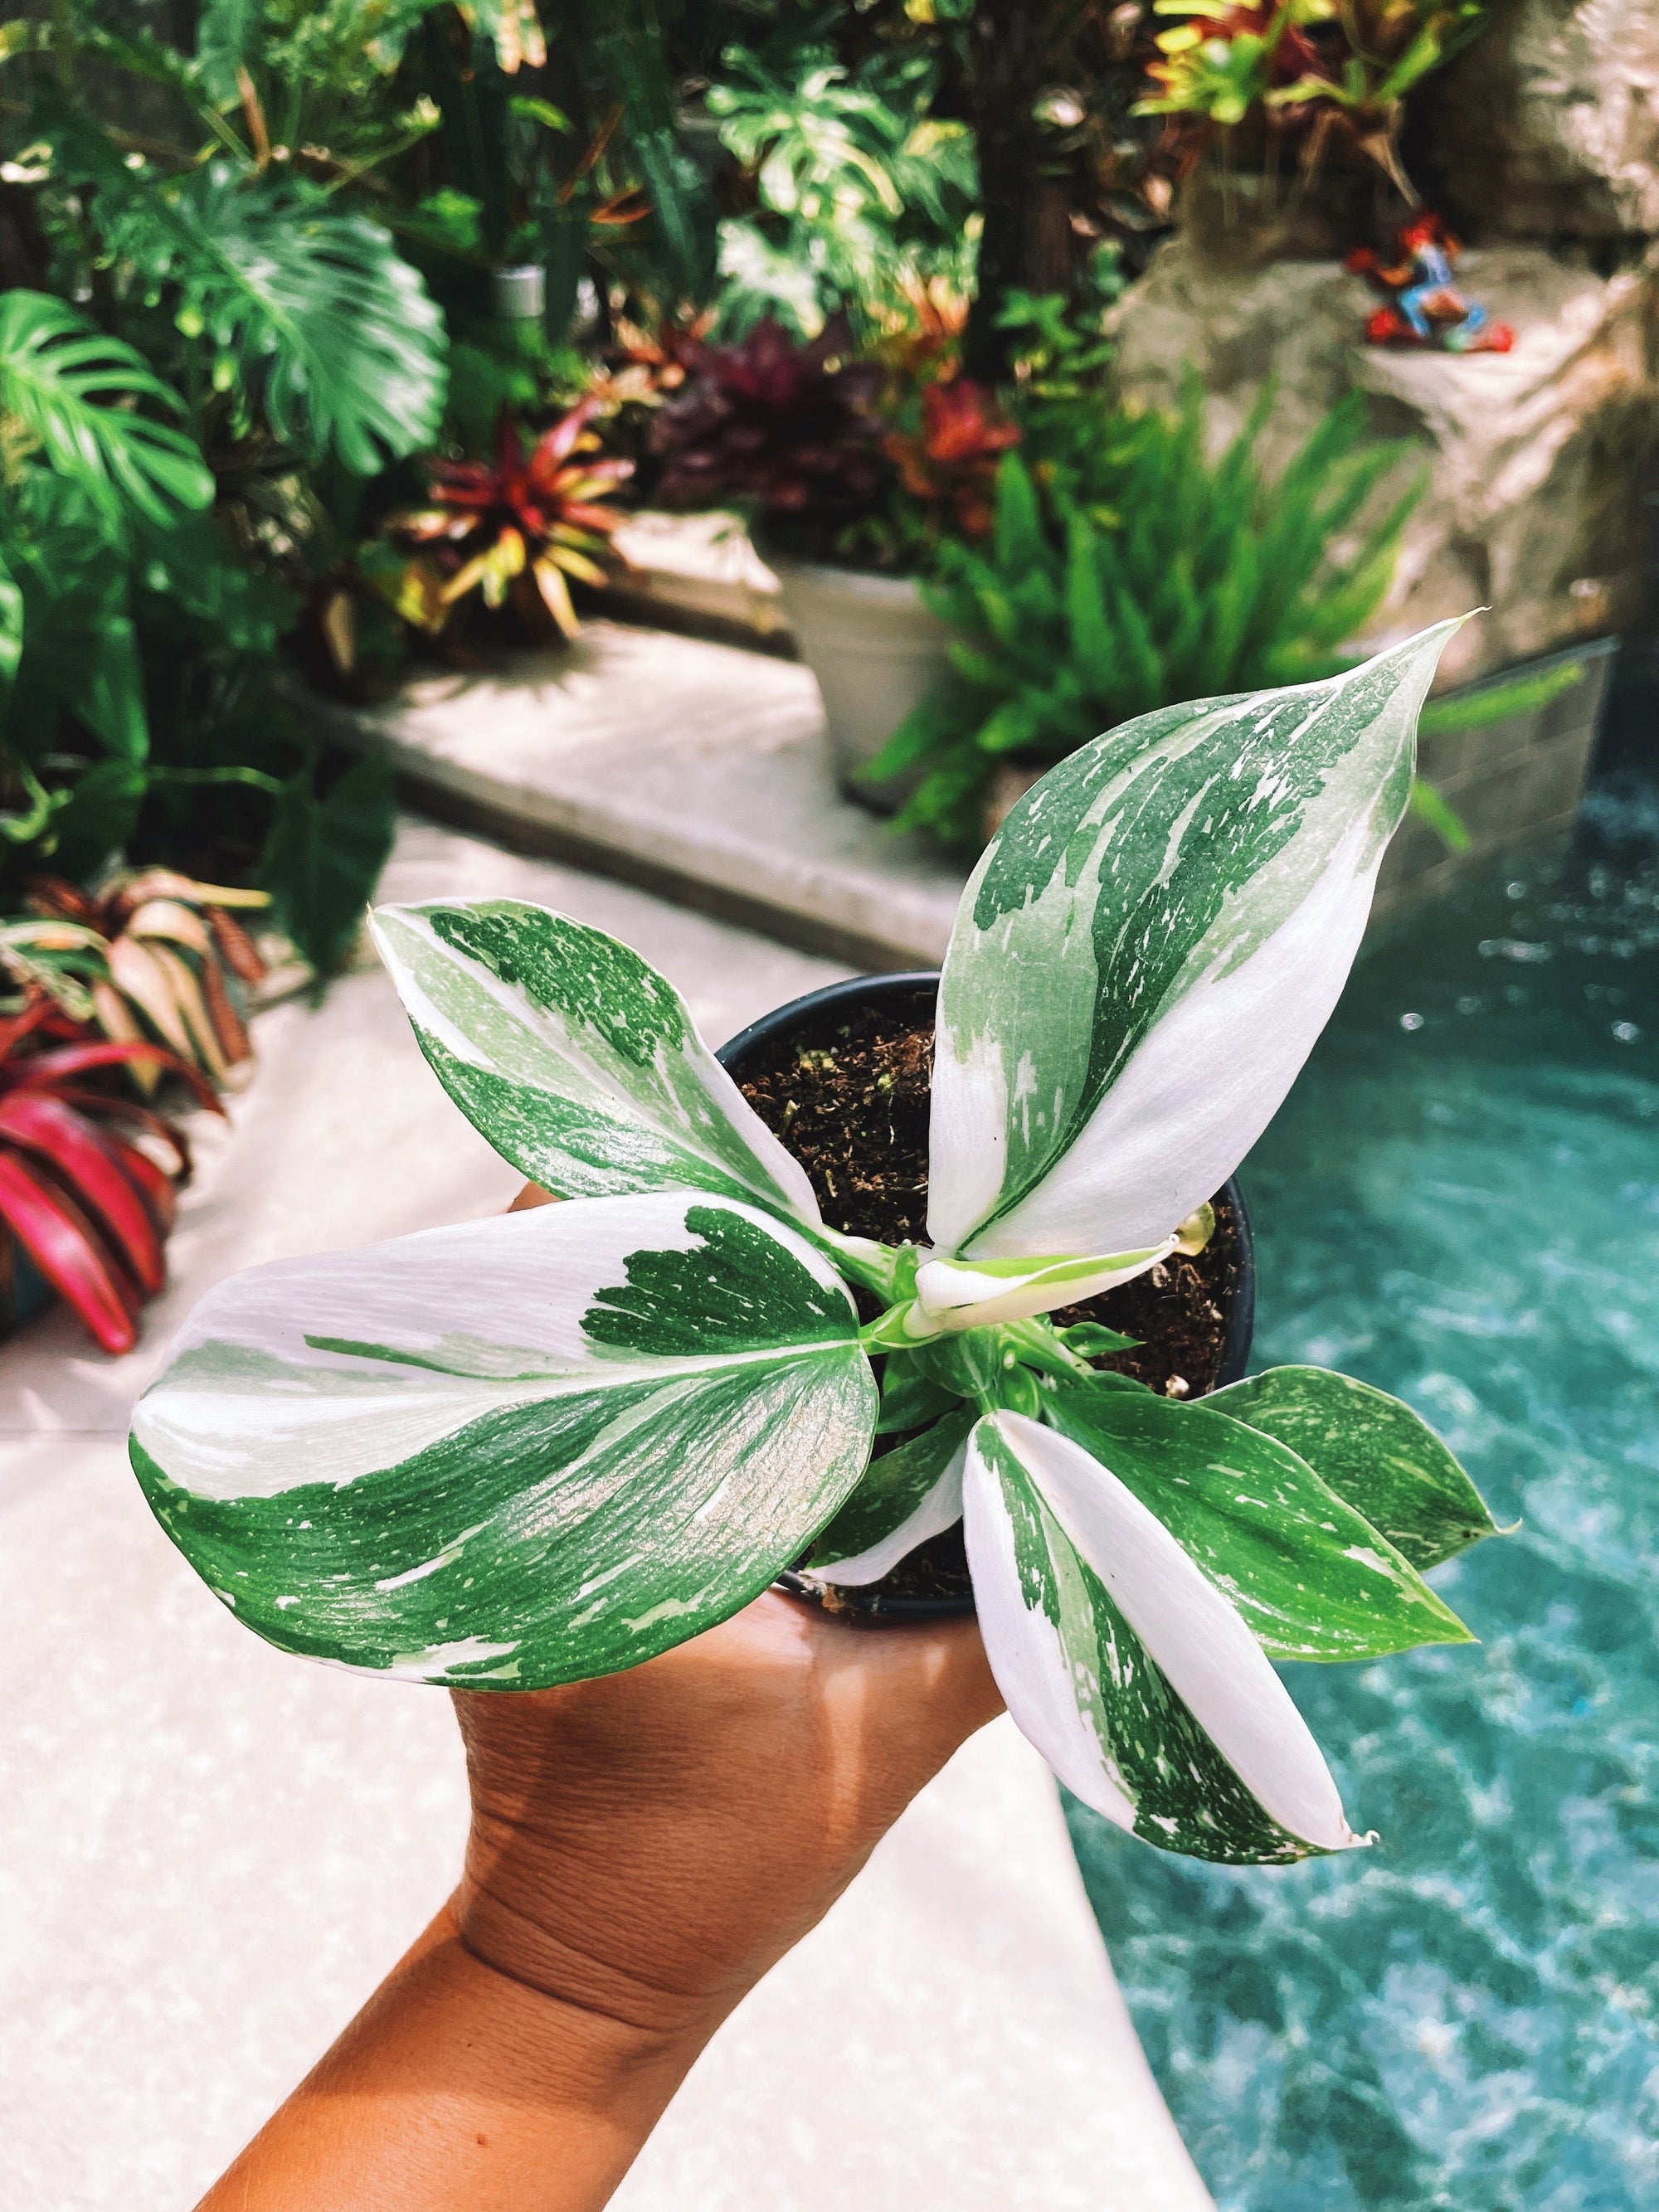 Rare Philodendron White Wizard Albo Tricolor Marble Galaxy Sport Variegated 4 potted plant gift Growers Choice aroid